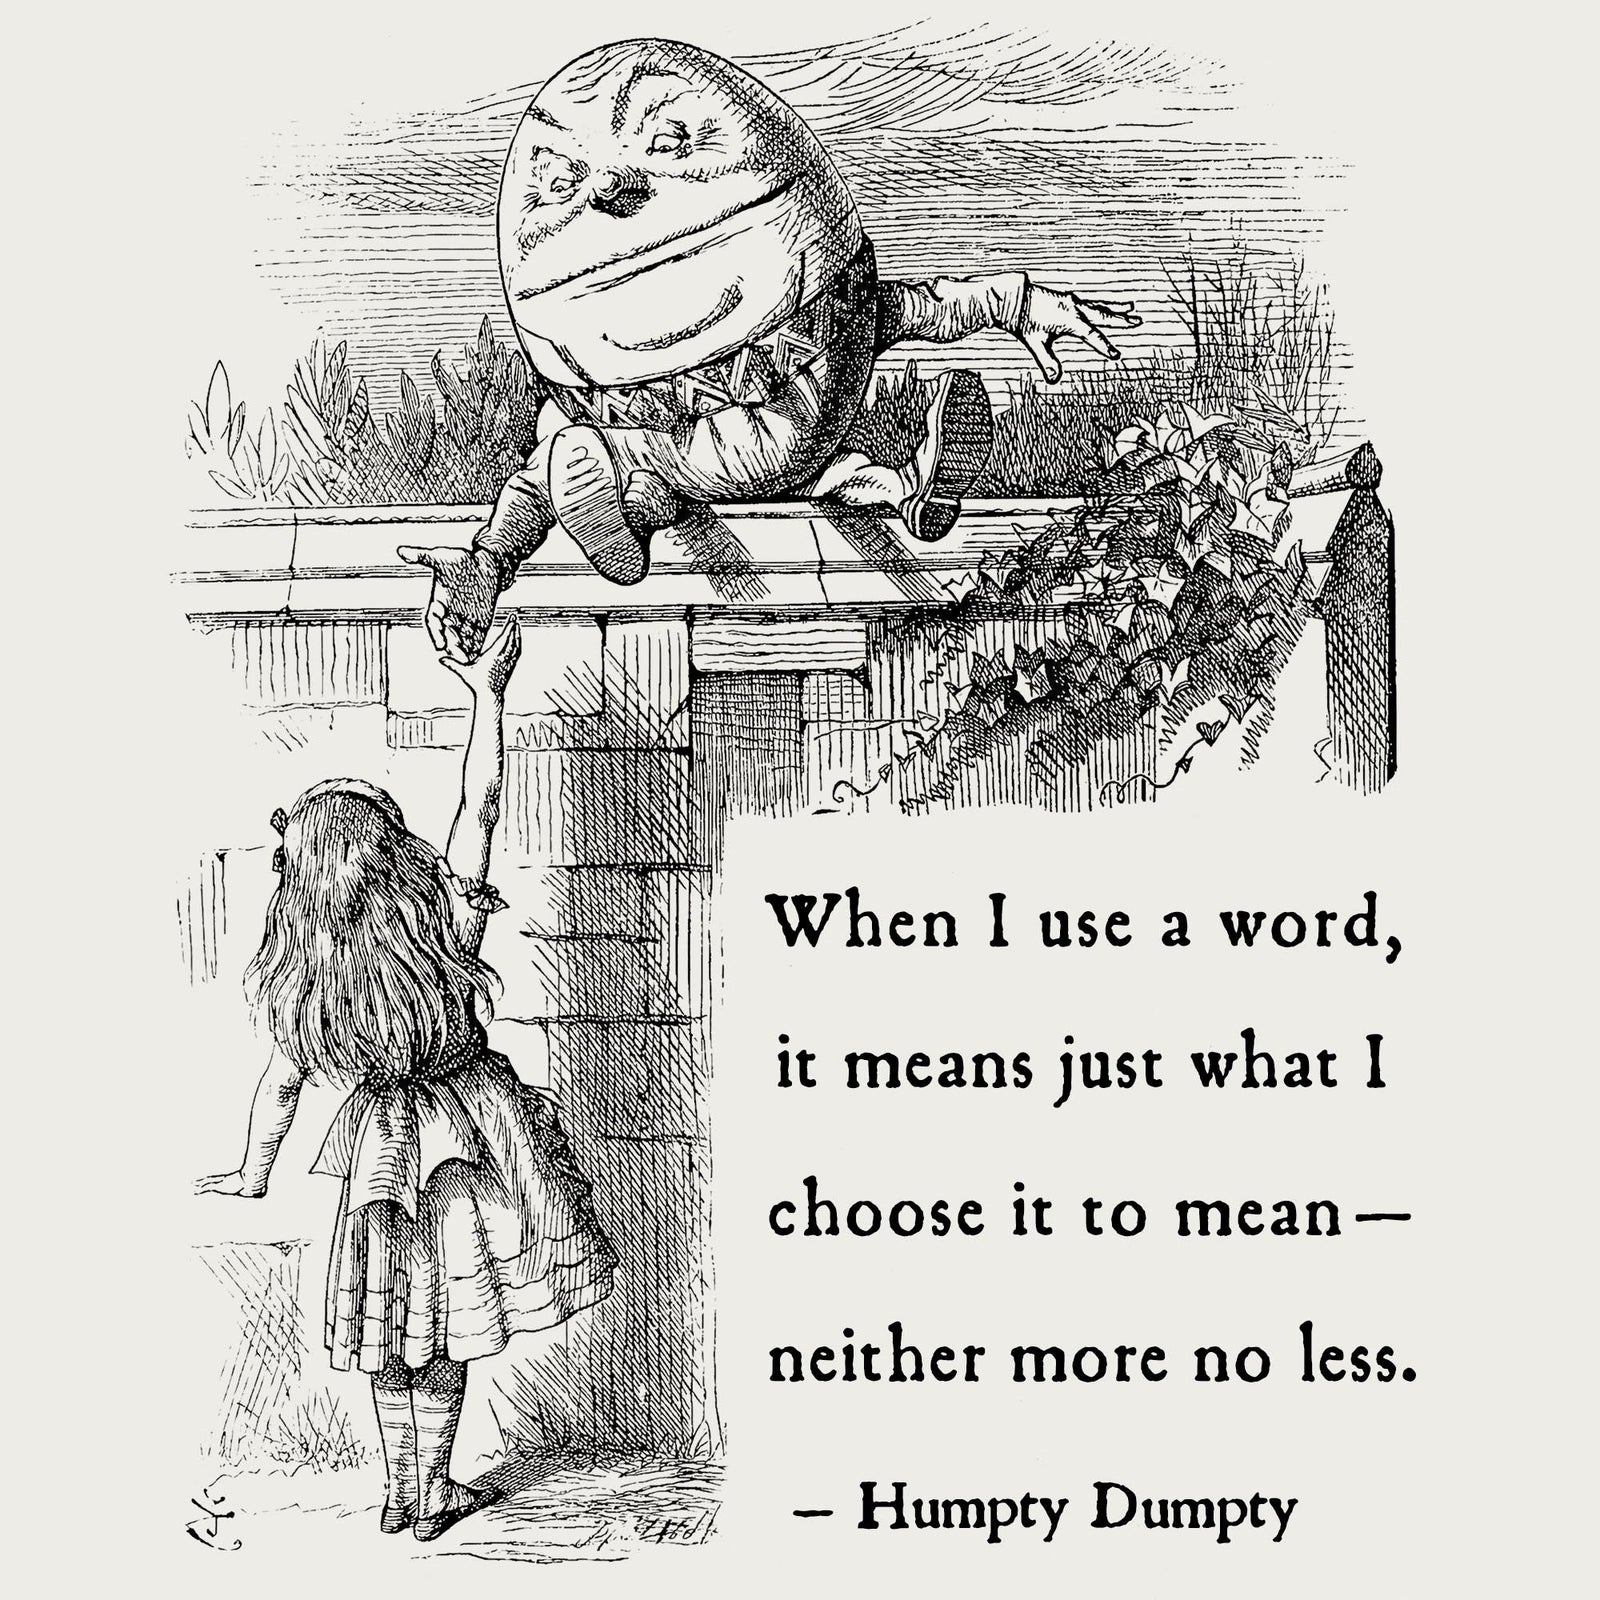 through-the-looking-glass-humpty-dumpty-